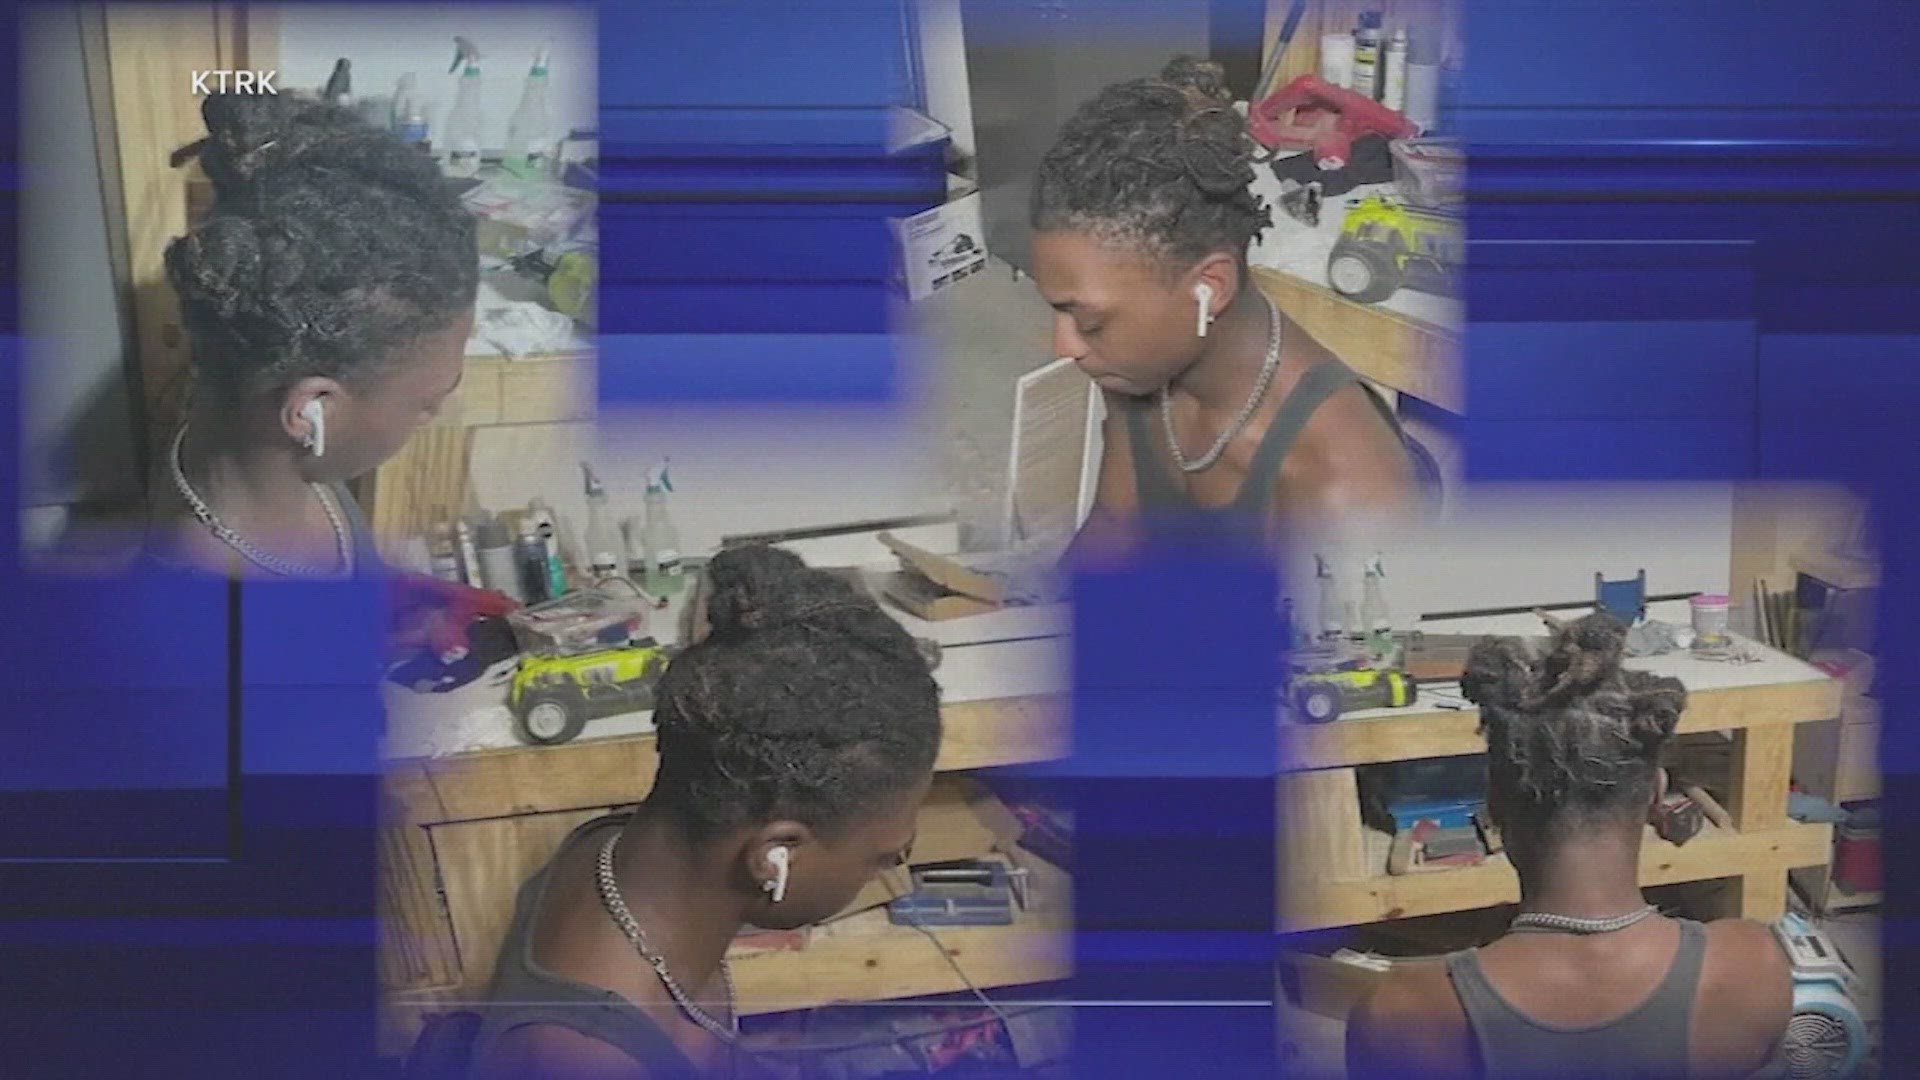 The Barbers Hill High School junior was initially suspended the same week Texas outlawed racial discrimination based on hairstyles.